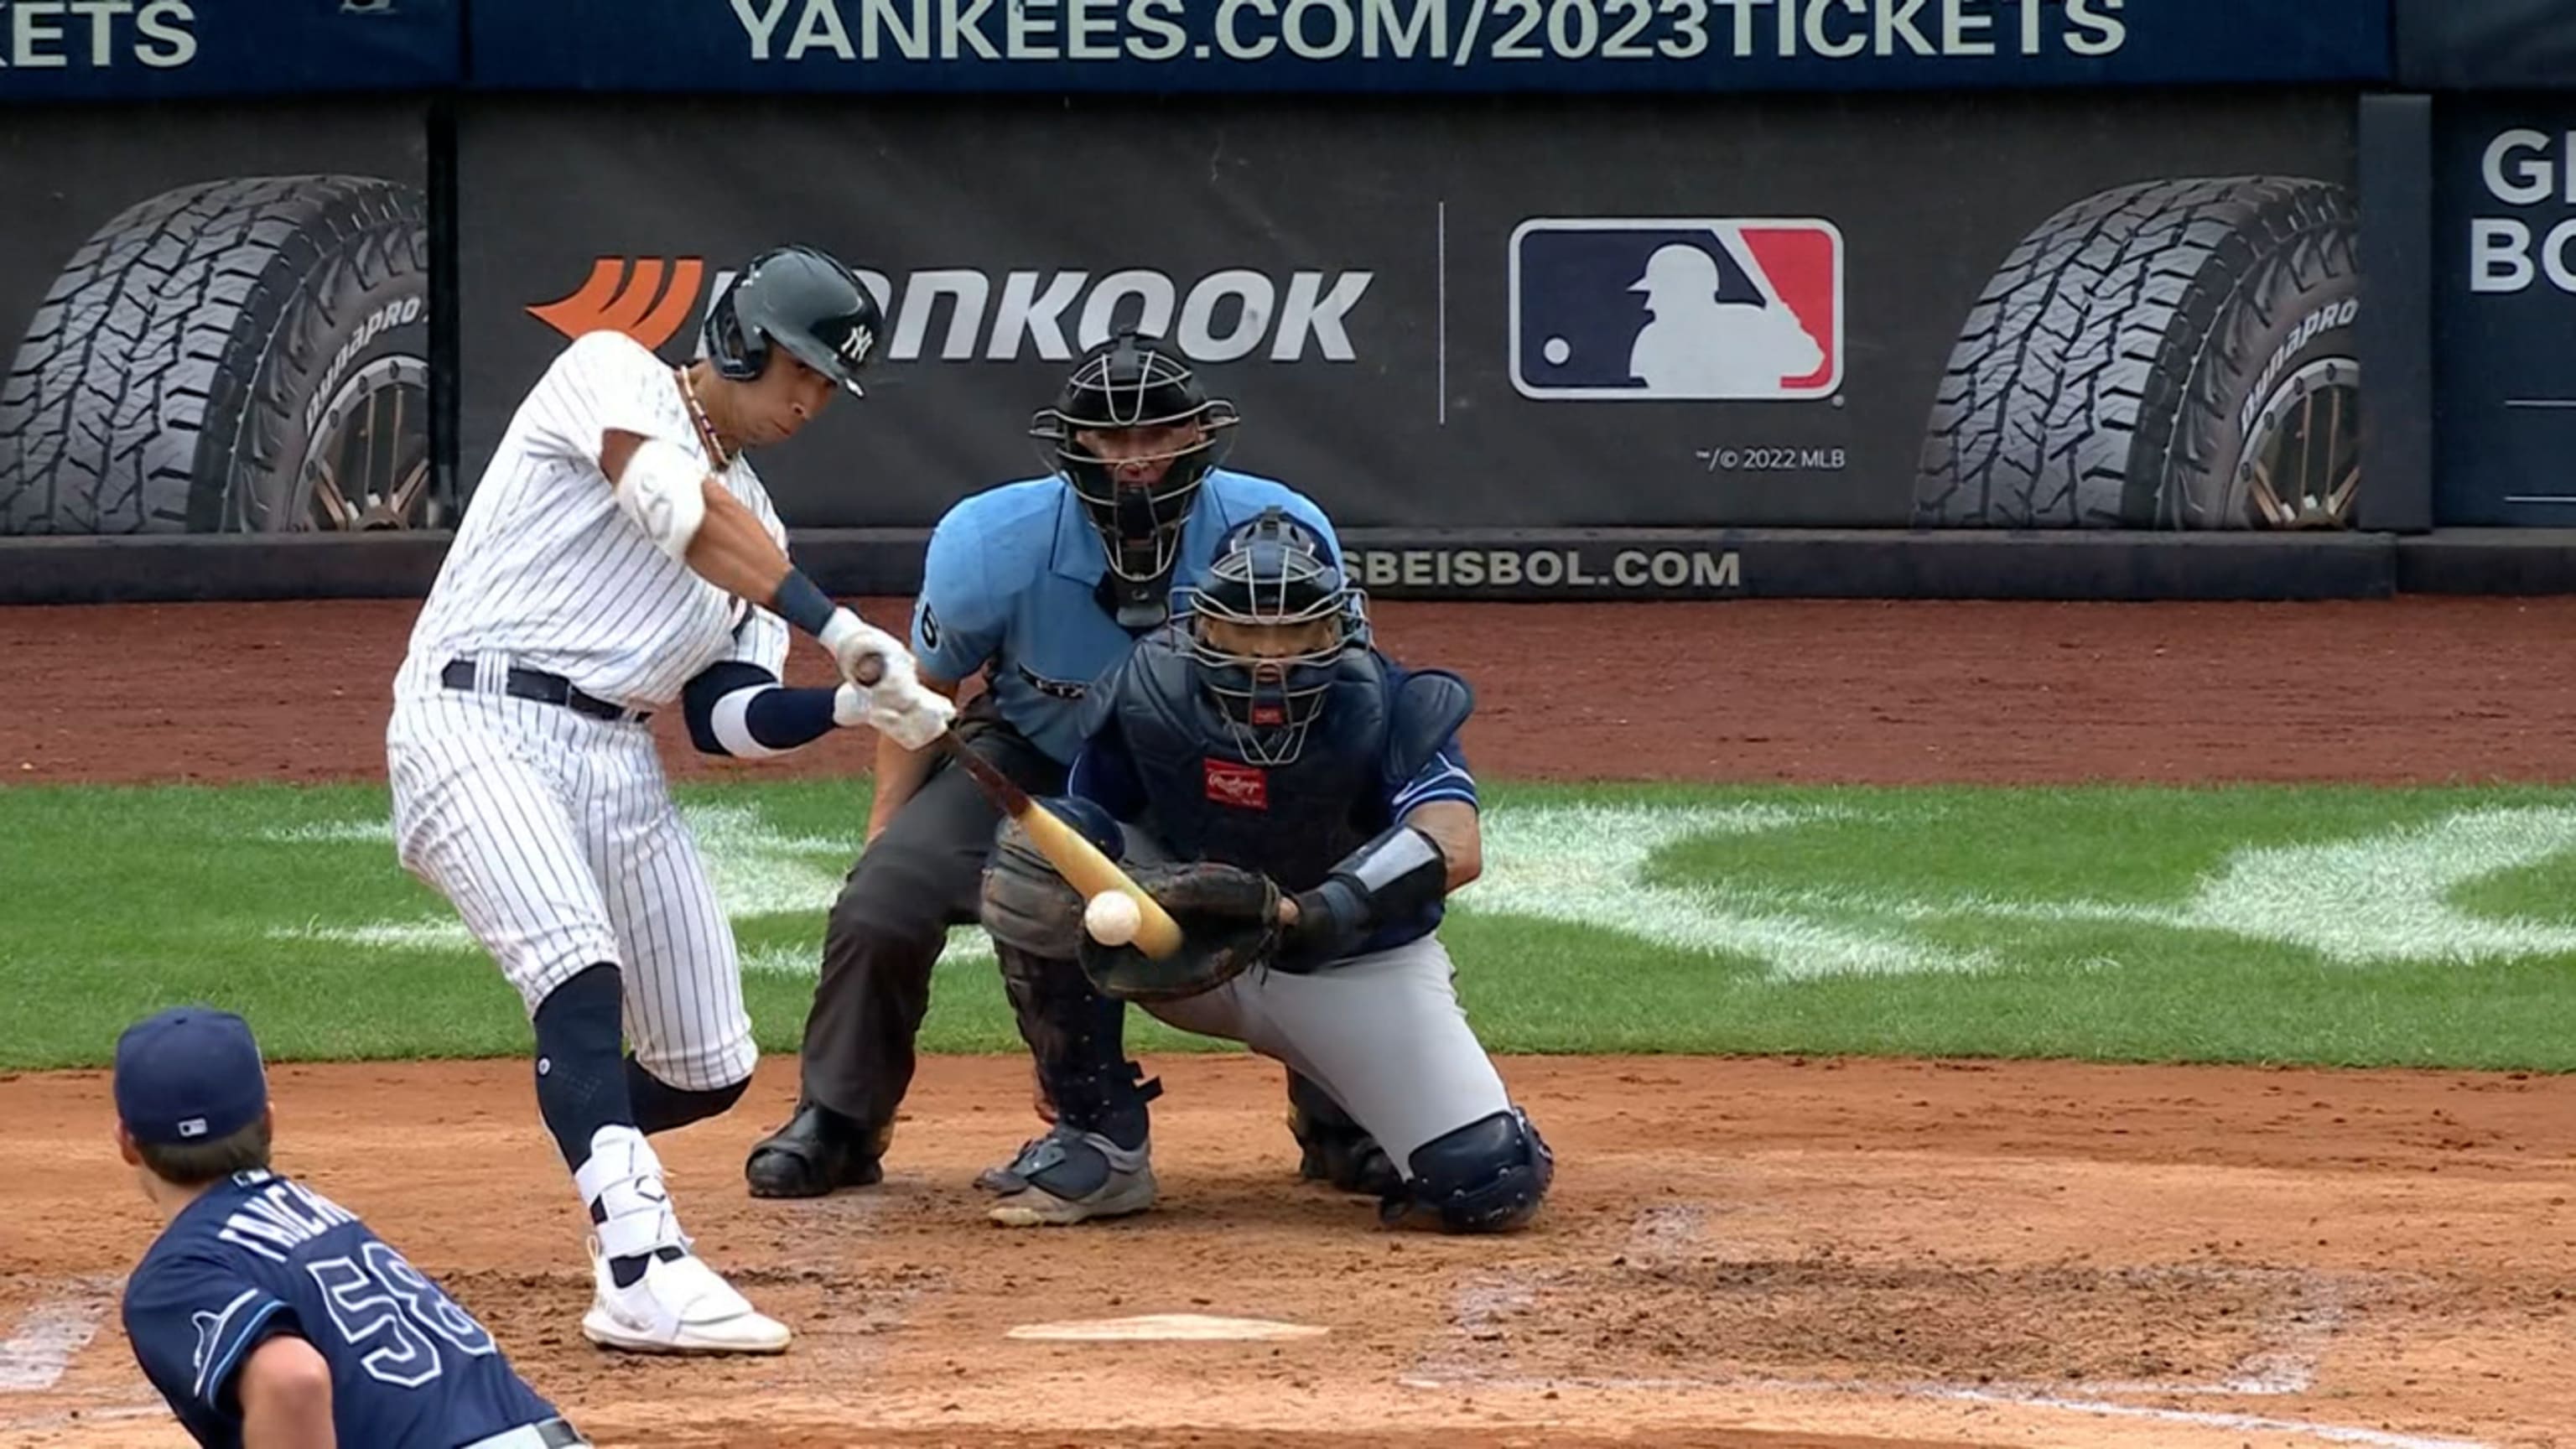 Gleyber Torres hits clutch pinch-hit two-run double